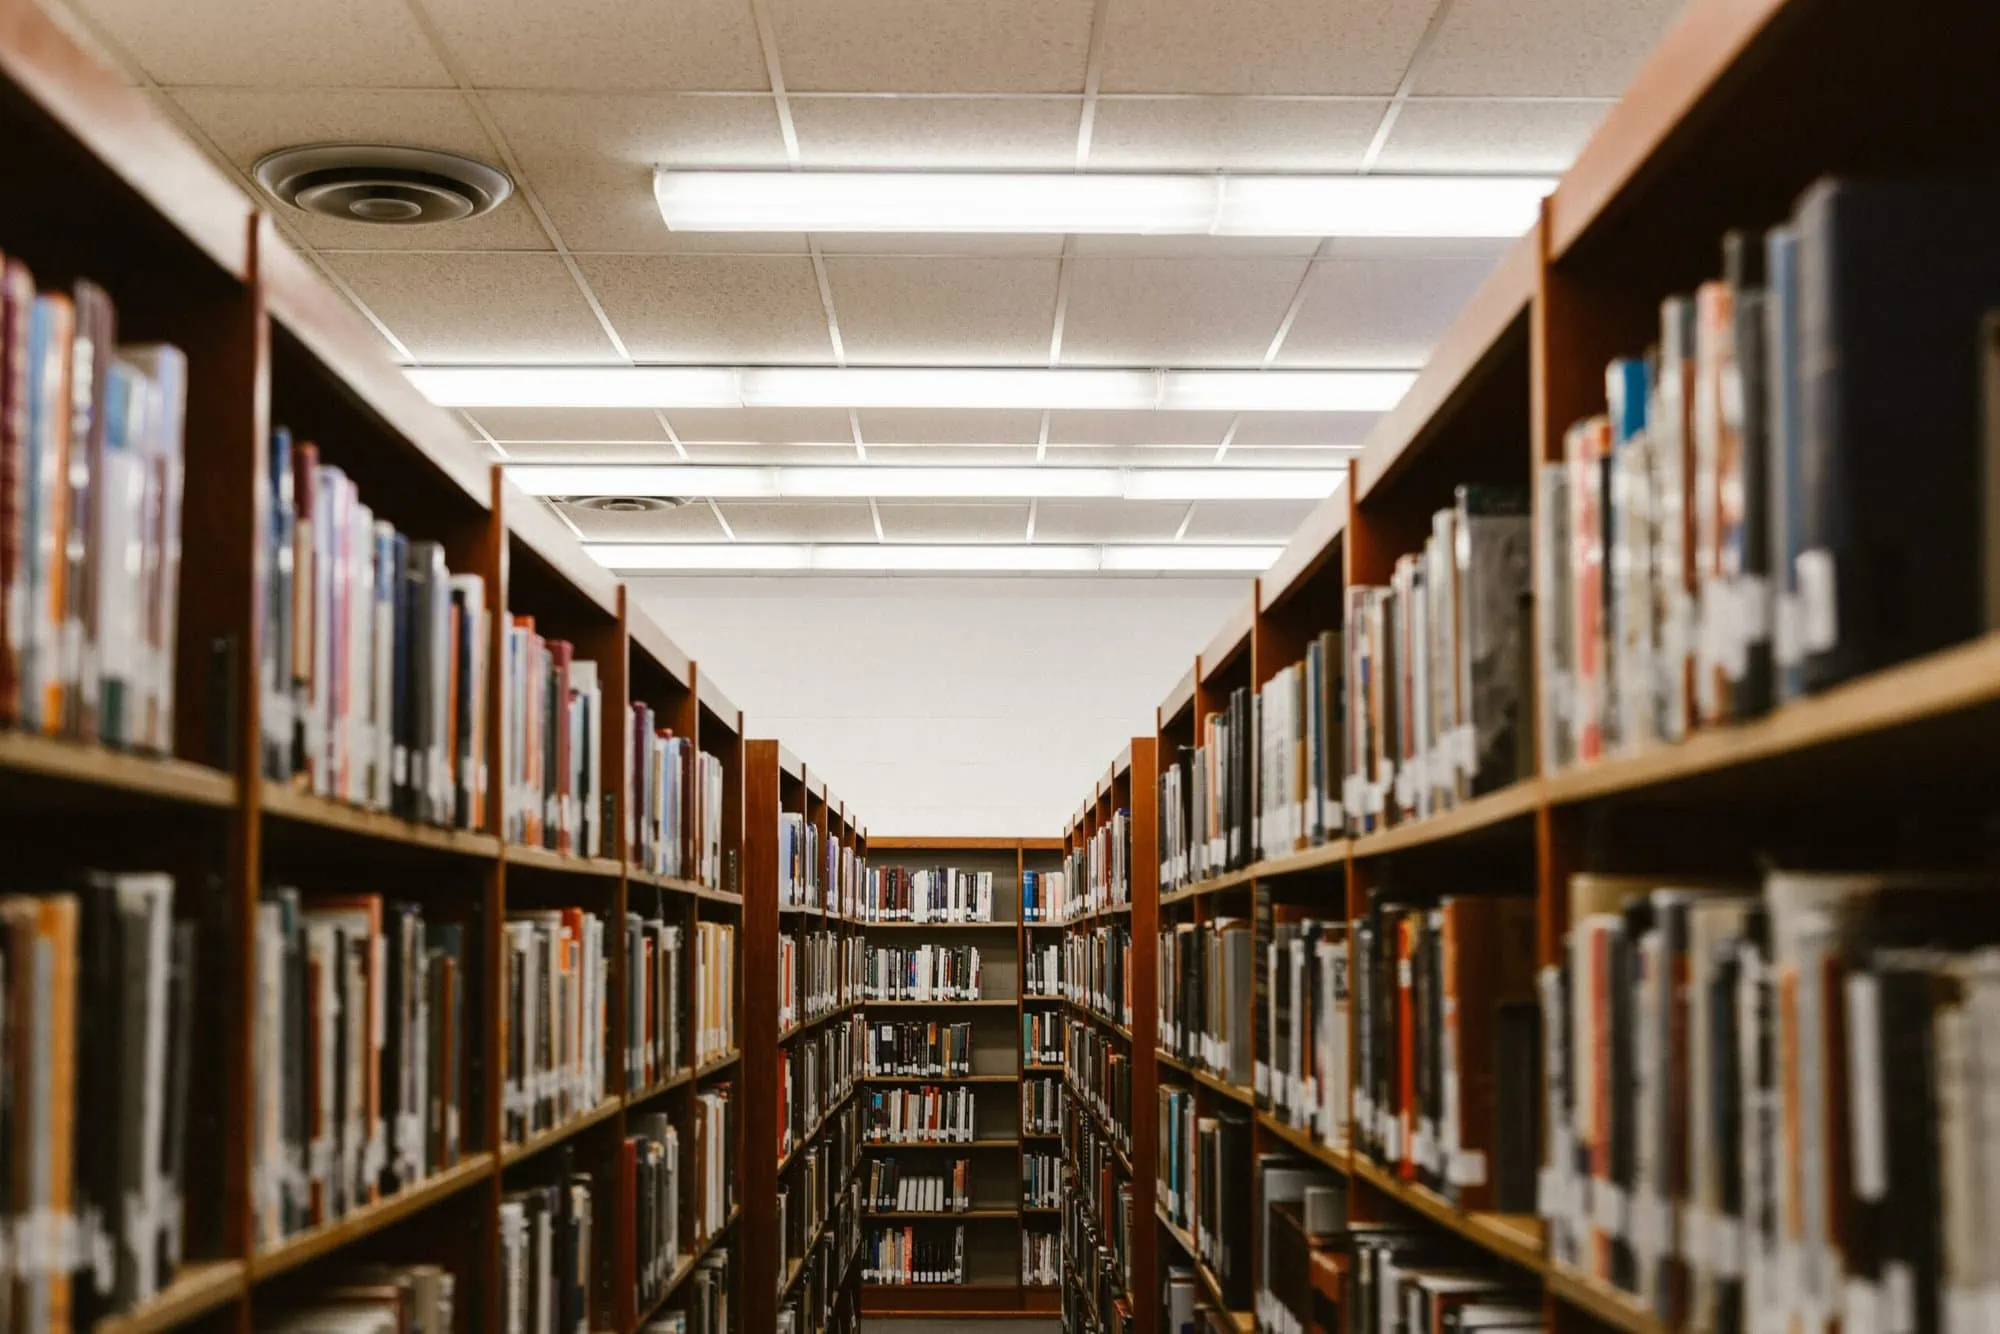 School library monitored by security camera with best video quality